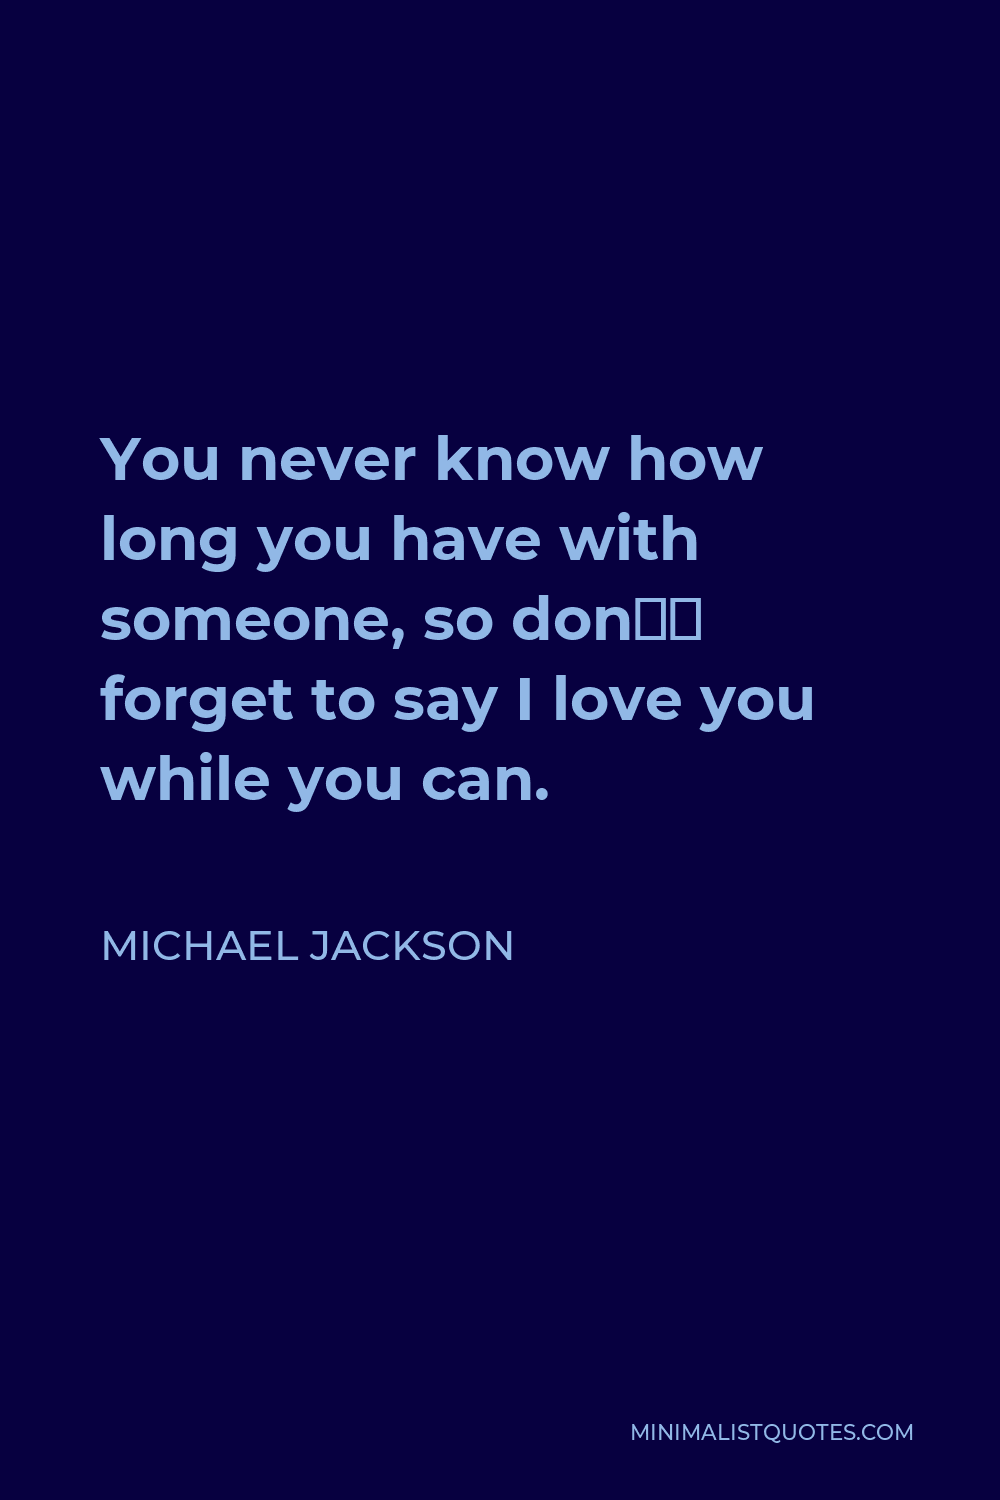 Michael Jackson Quote - You never know how long you have with someone, so don’t forget to say I love you while you can.